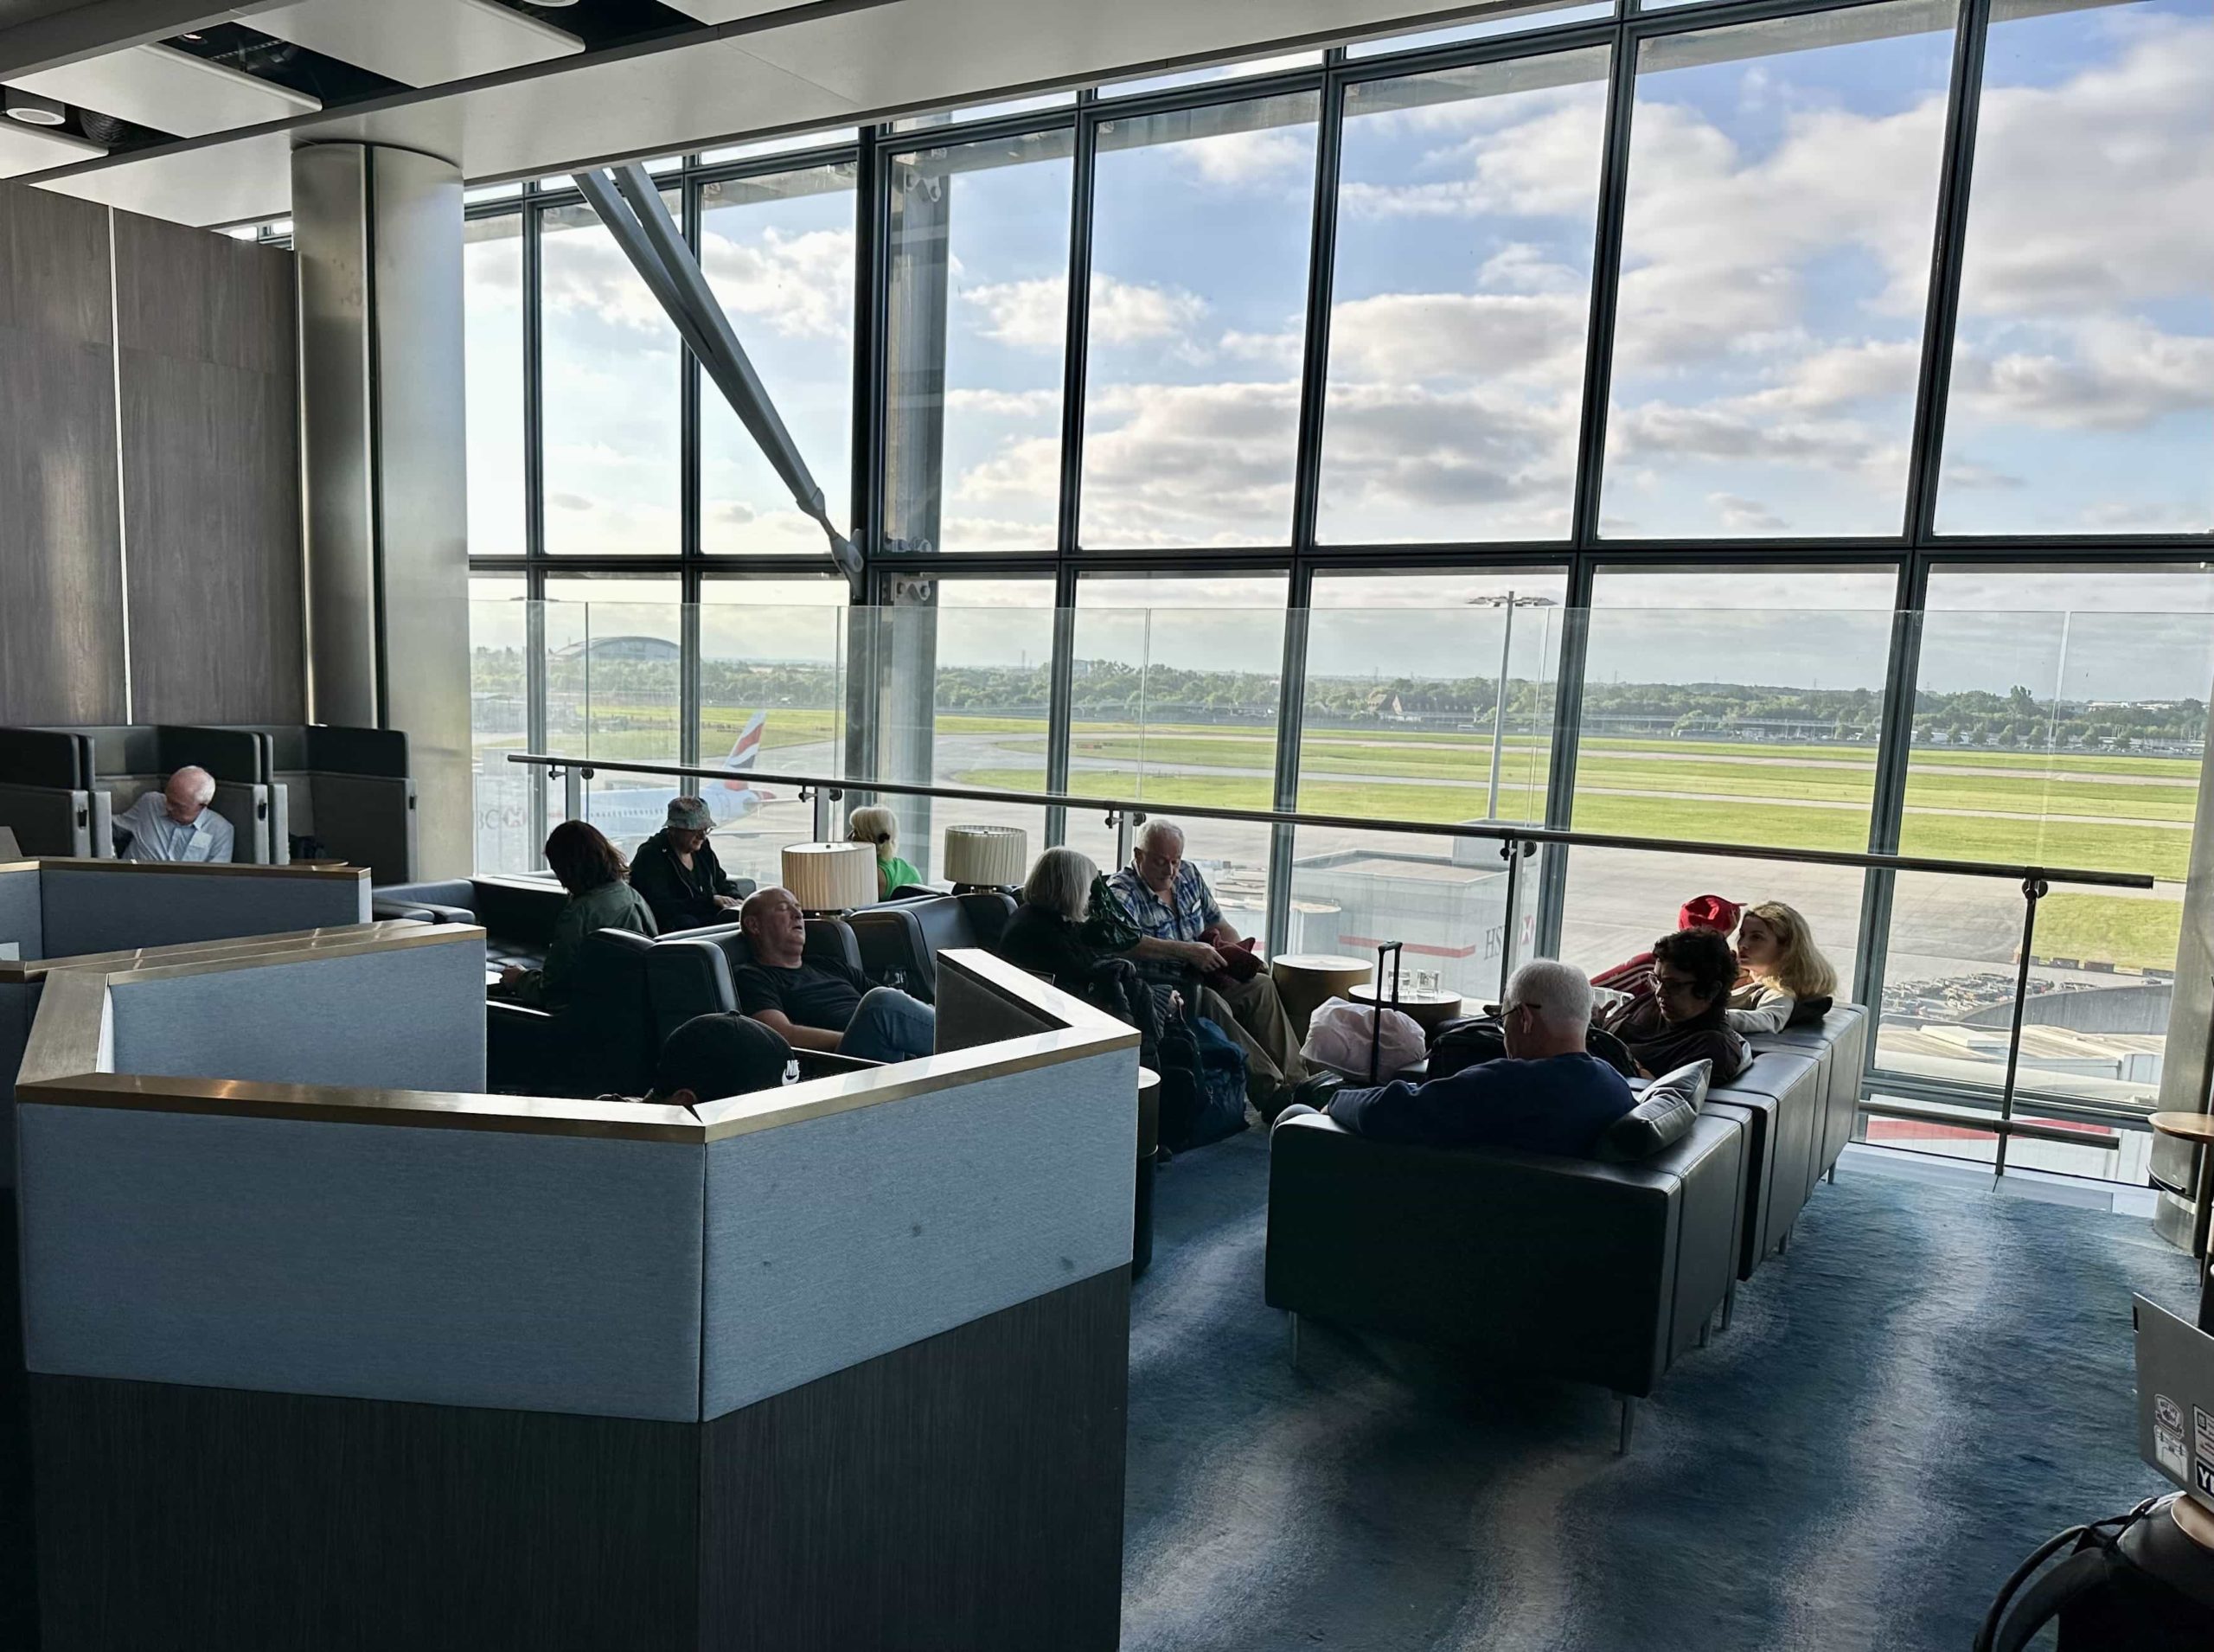 Casual seating in an airport lounge with great views overlooking the runway